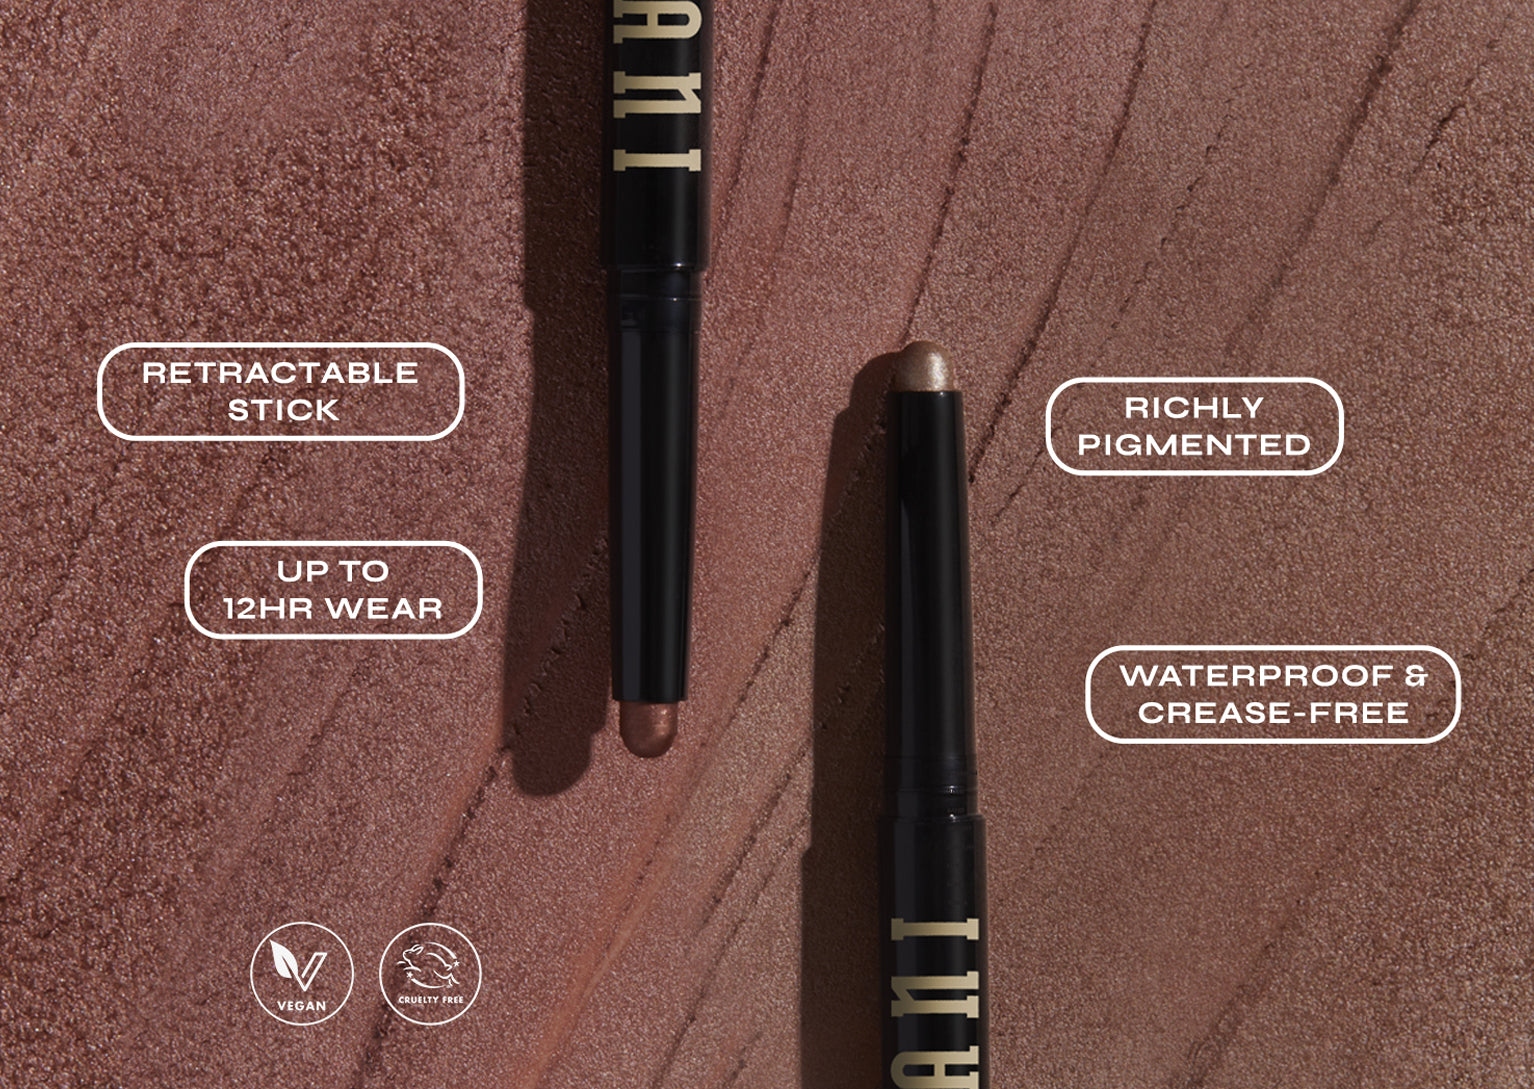 retractable stick, up to 12 hr wear, richly pigmented, waterproof & crease-free 